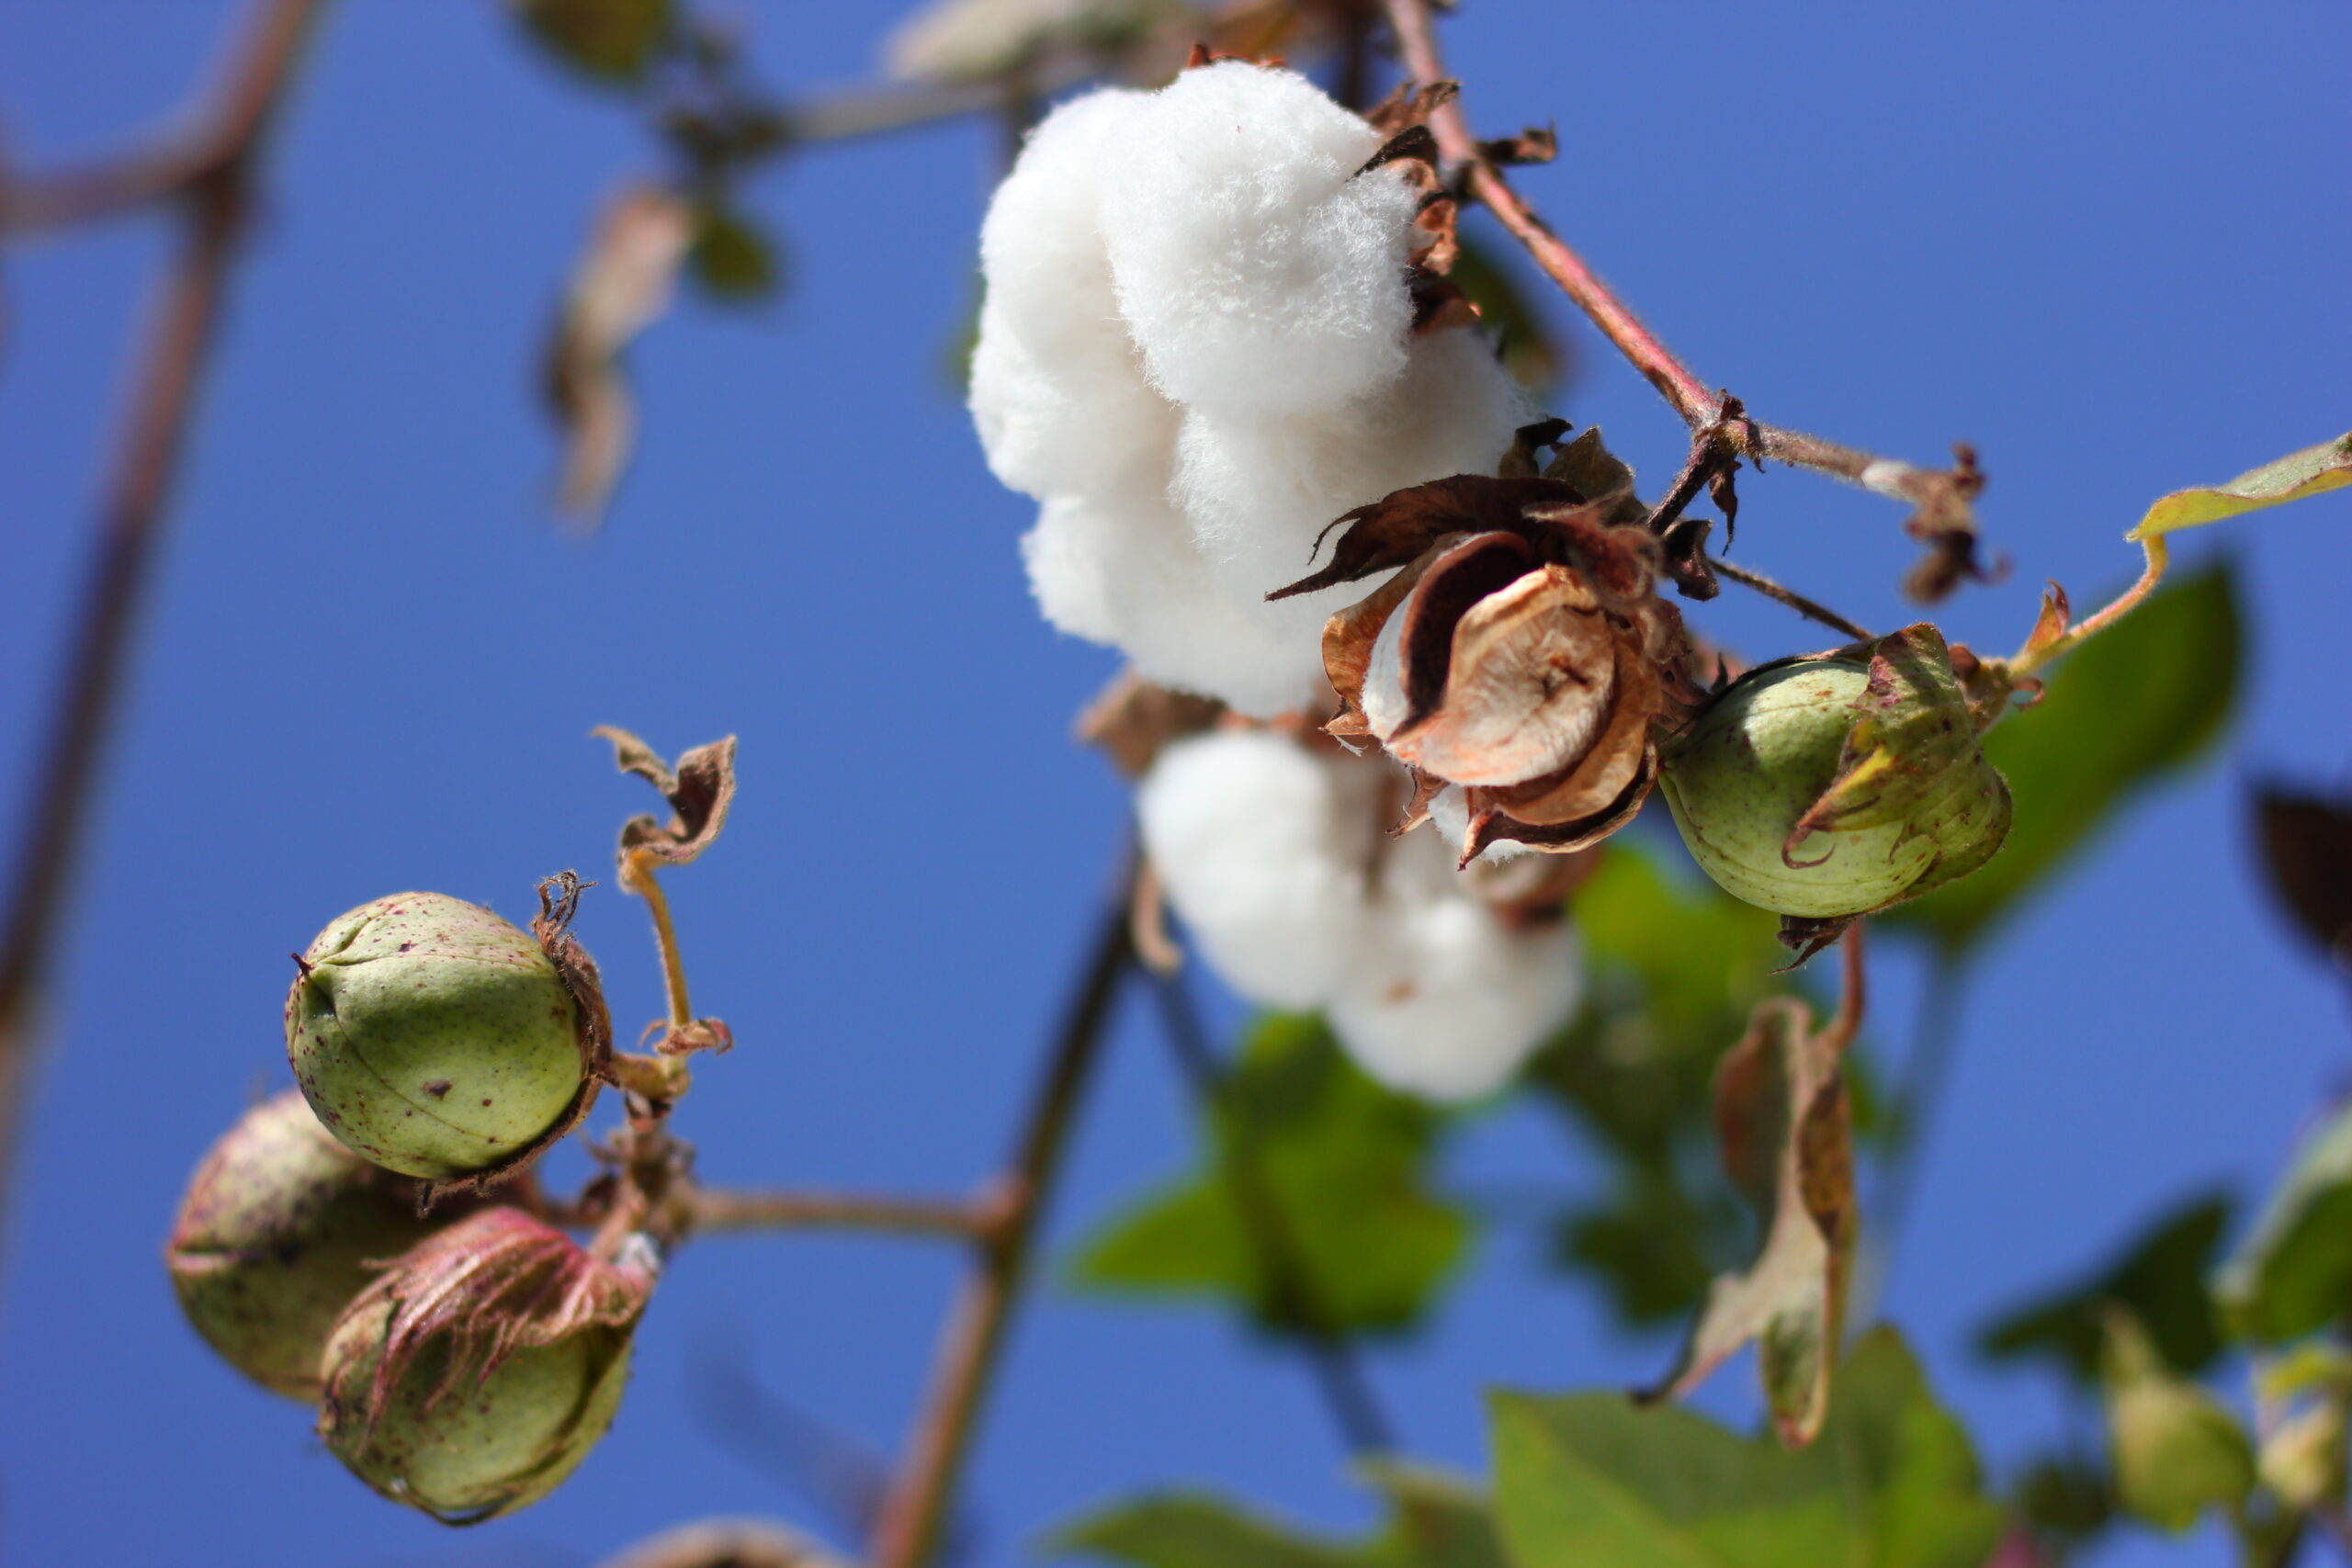 Primark announces major expansion of its Sustainable Cotton Programme,  intending to train 275,000 cotton farmers in more sustainable farming by  2023